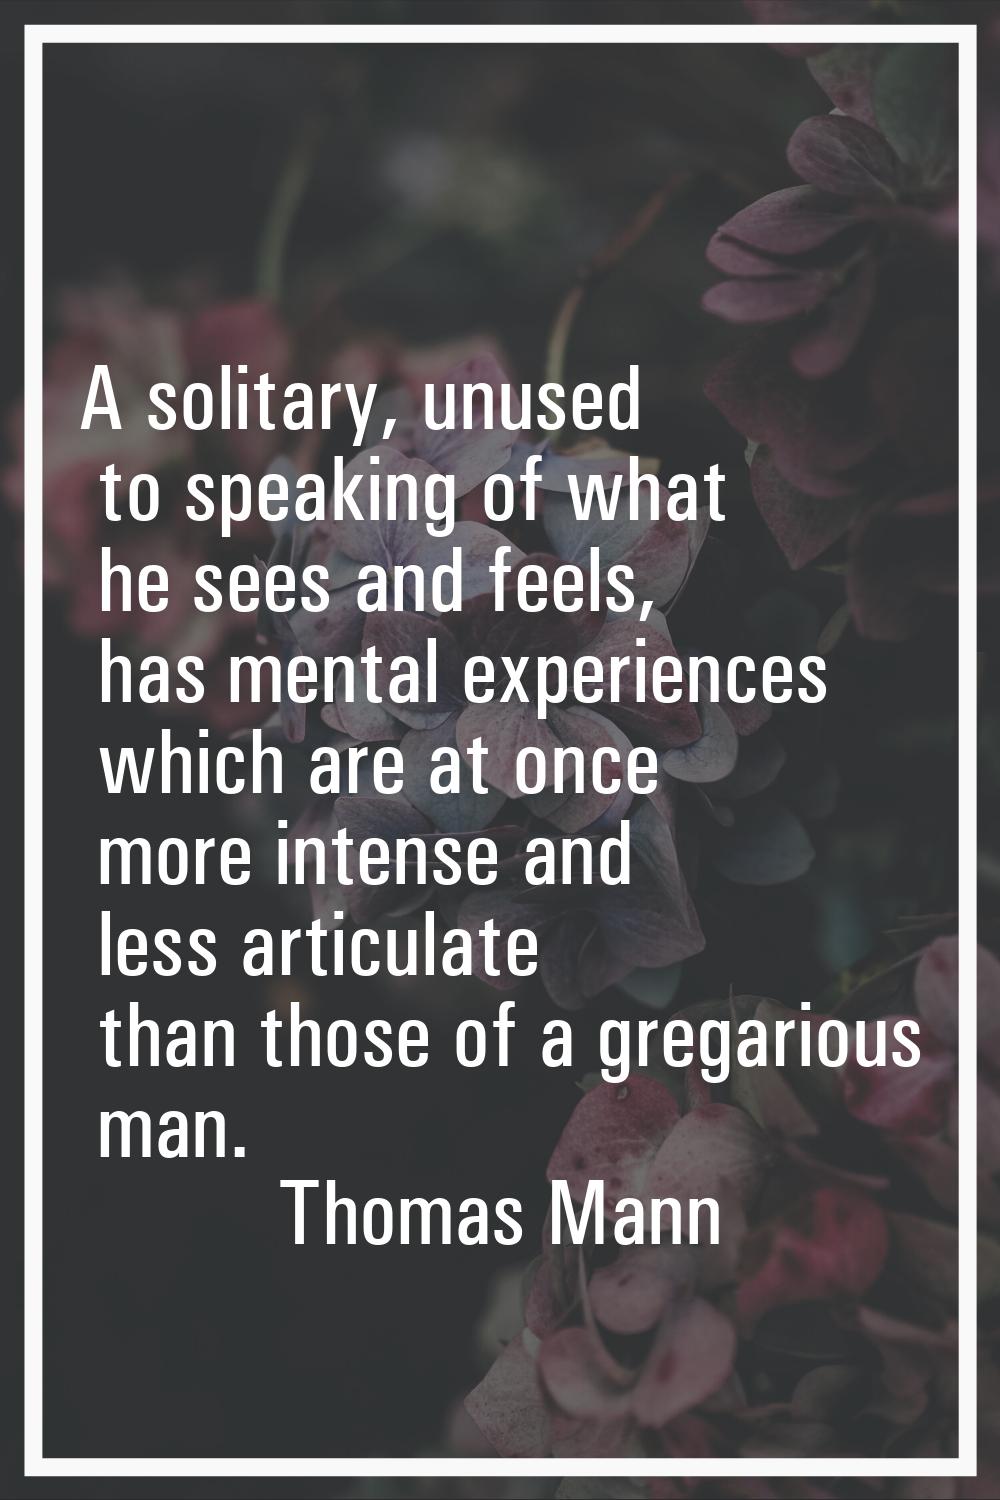 A solitary, unused to speaking of what he sees and feels, has mental experiences which are at once 